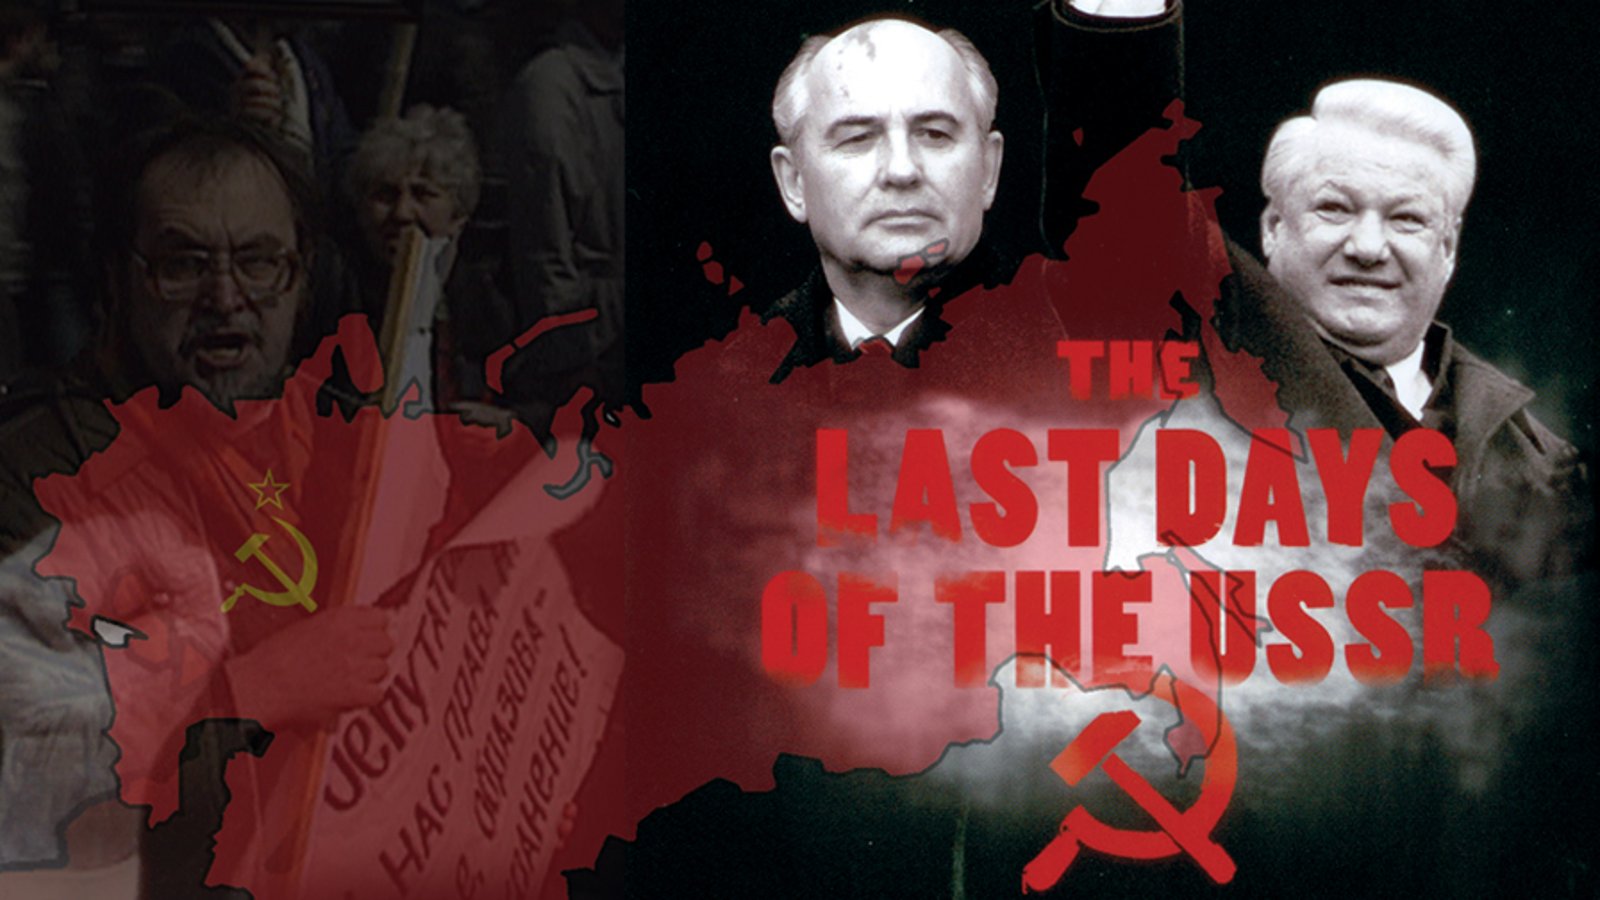 The Last Days Of The USSR